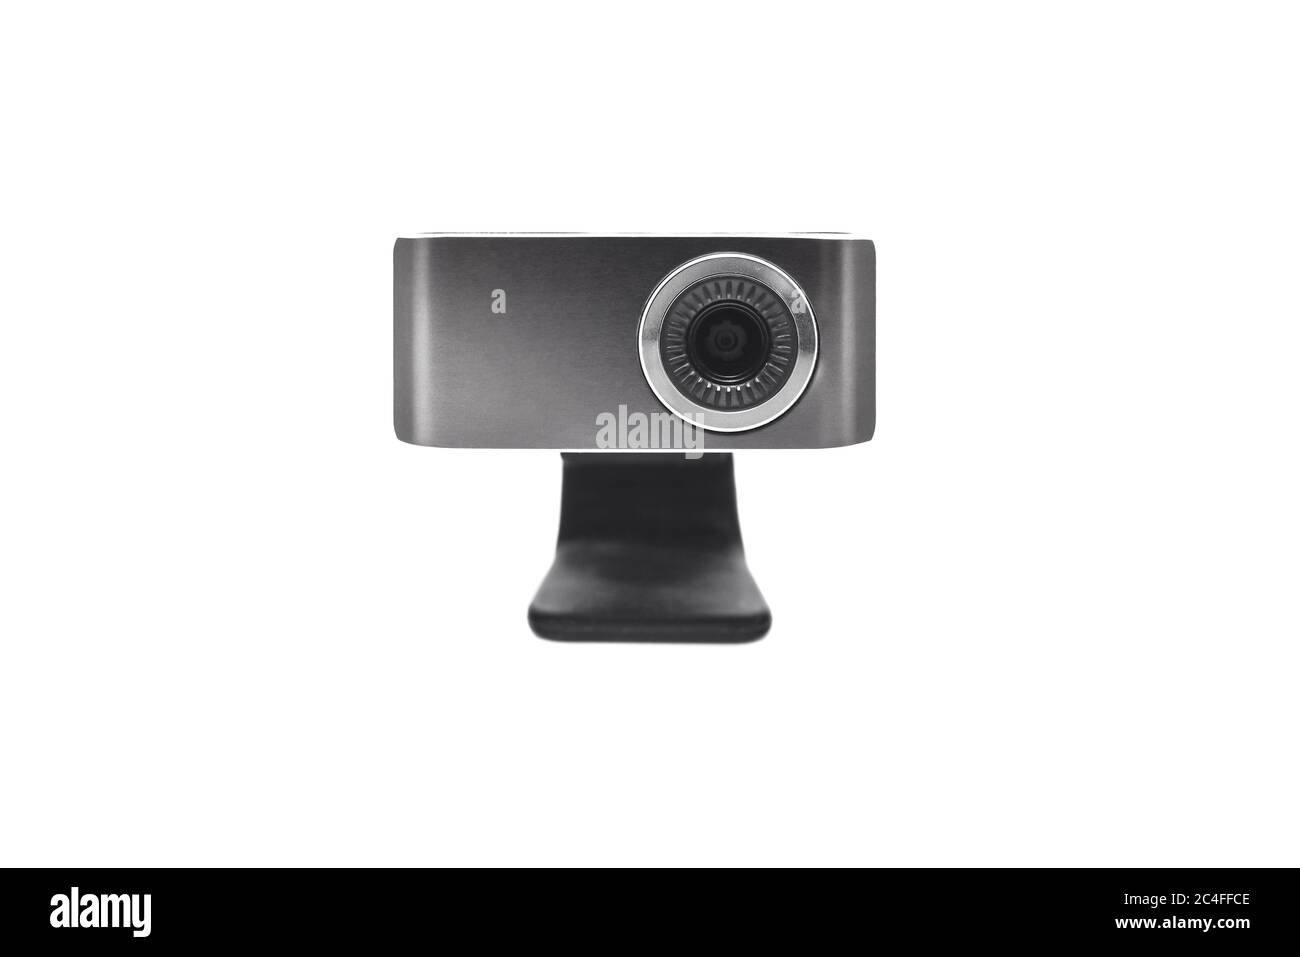 Web camera close-up isolated on a background Stock Photo